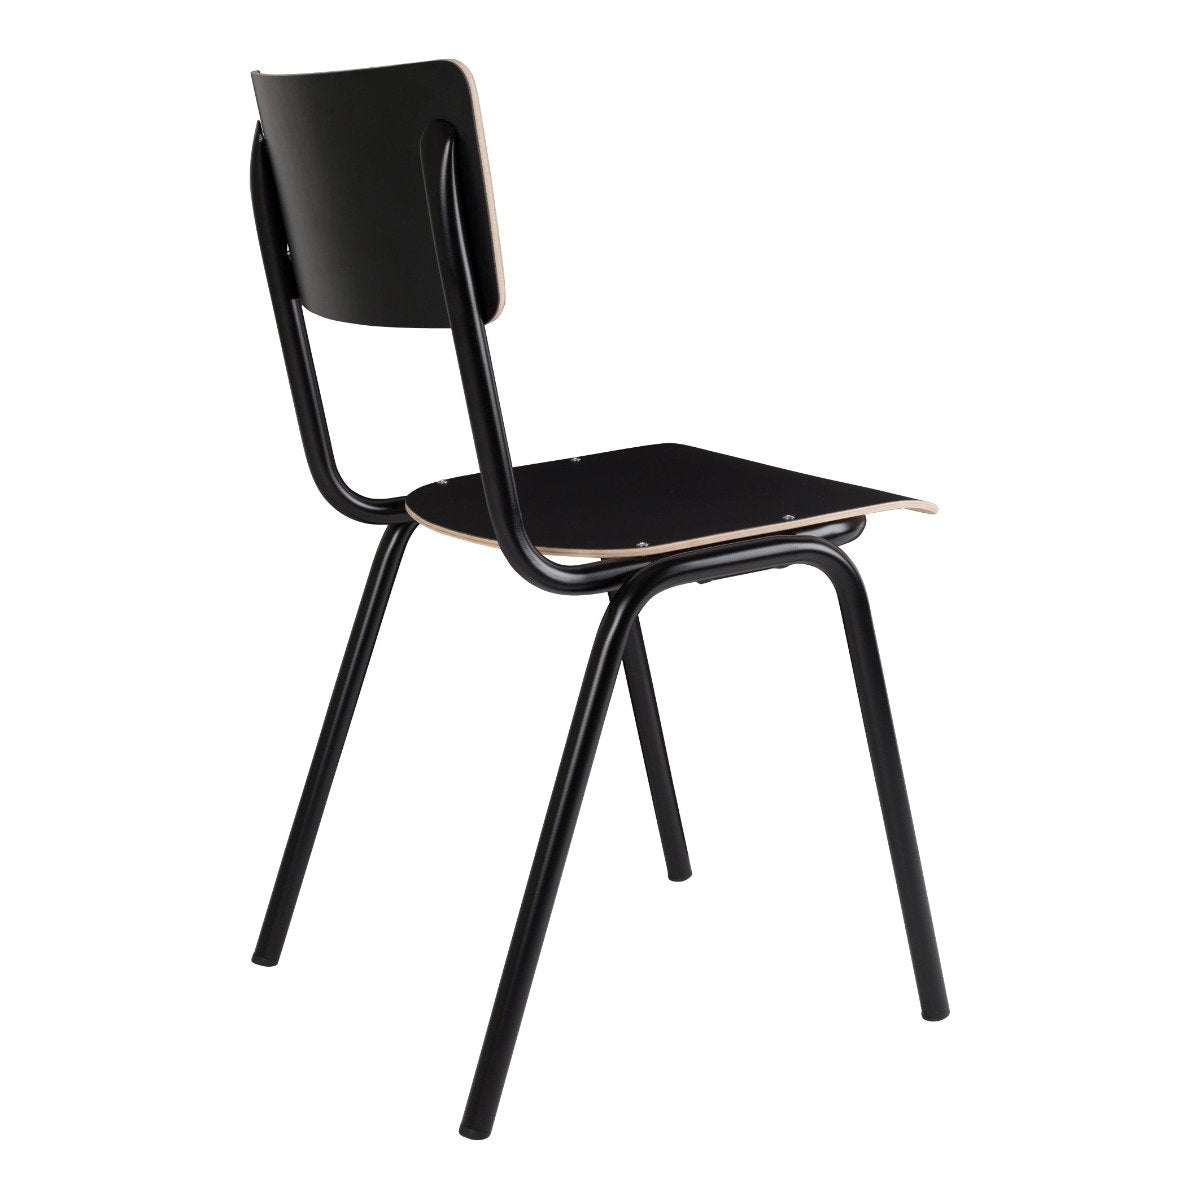 BACK TO SCHOOL chair black, Zuiver, Eye on Design